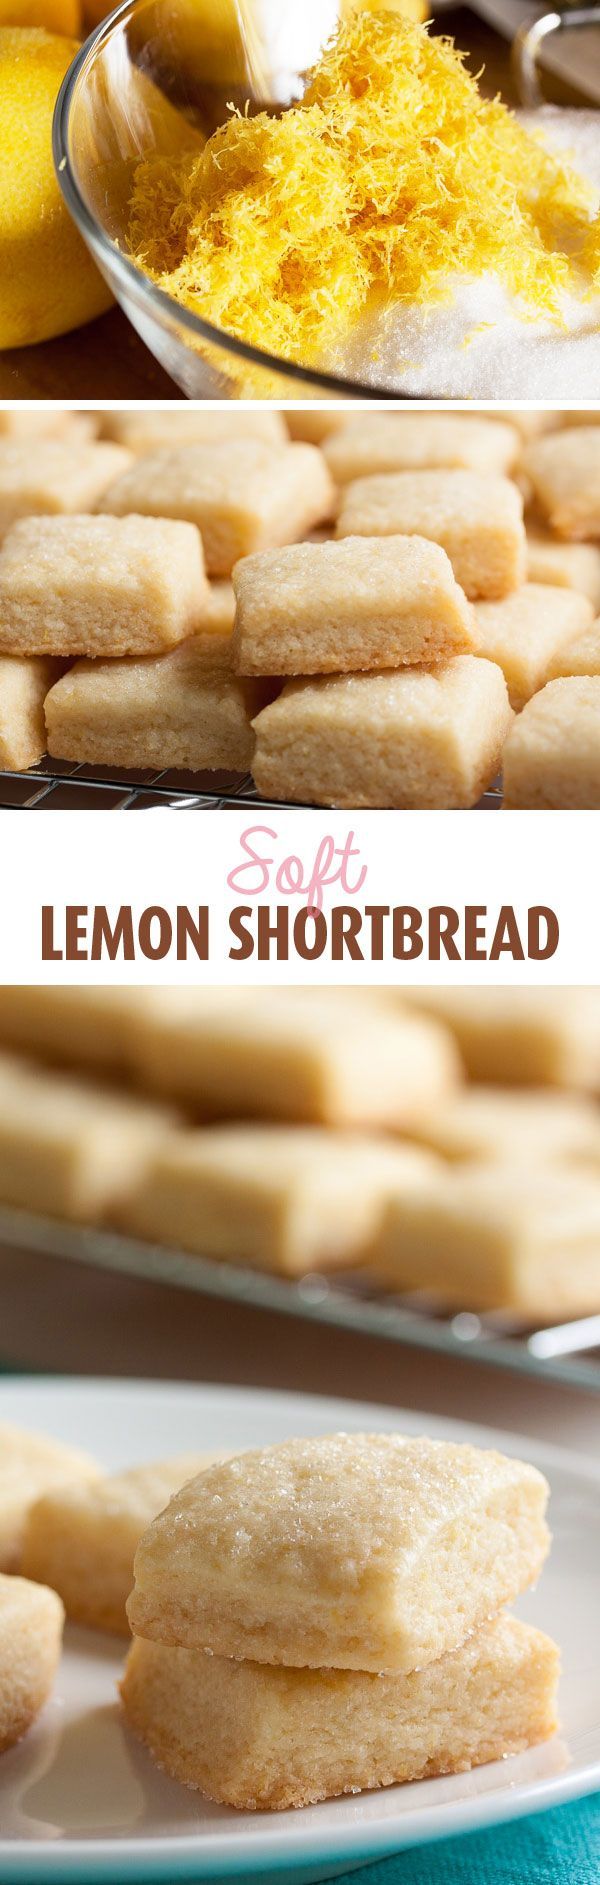 This tiny lemon shortbread cookie is soft and tender and buttery. A lovely variation on traditional shortb